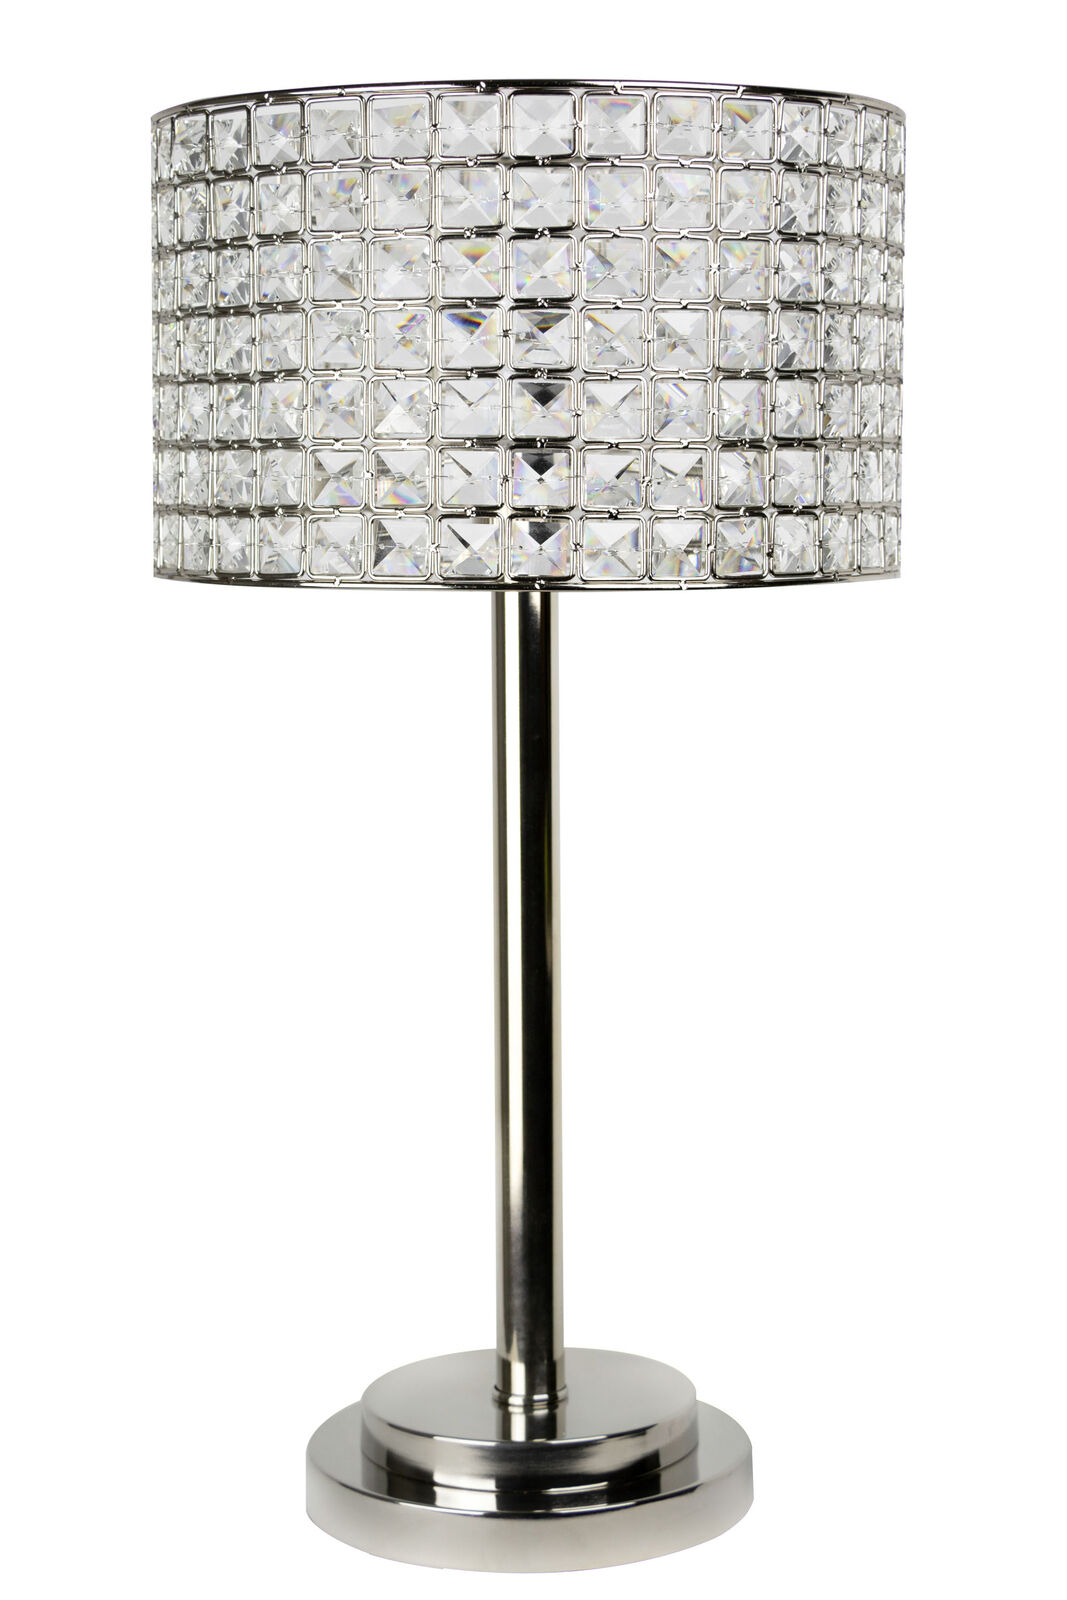 Grandview Gallery 2575 Polished Nickel Modern Table Lamp Genuine Crystal Bead within size 1067 X 1600